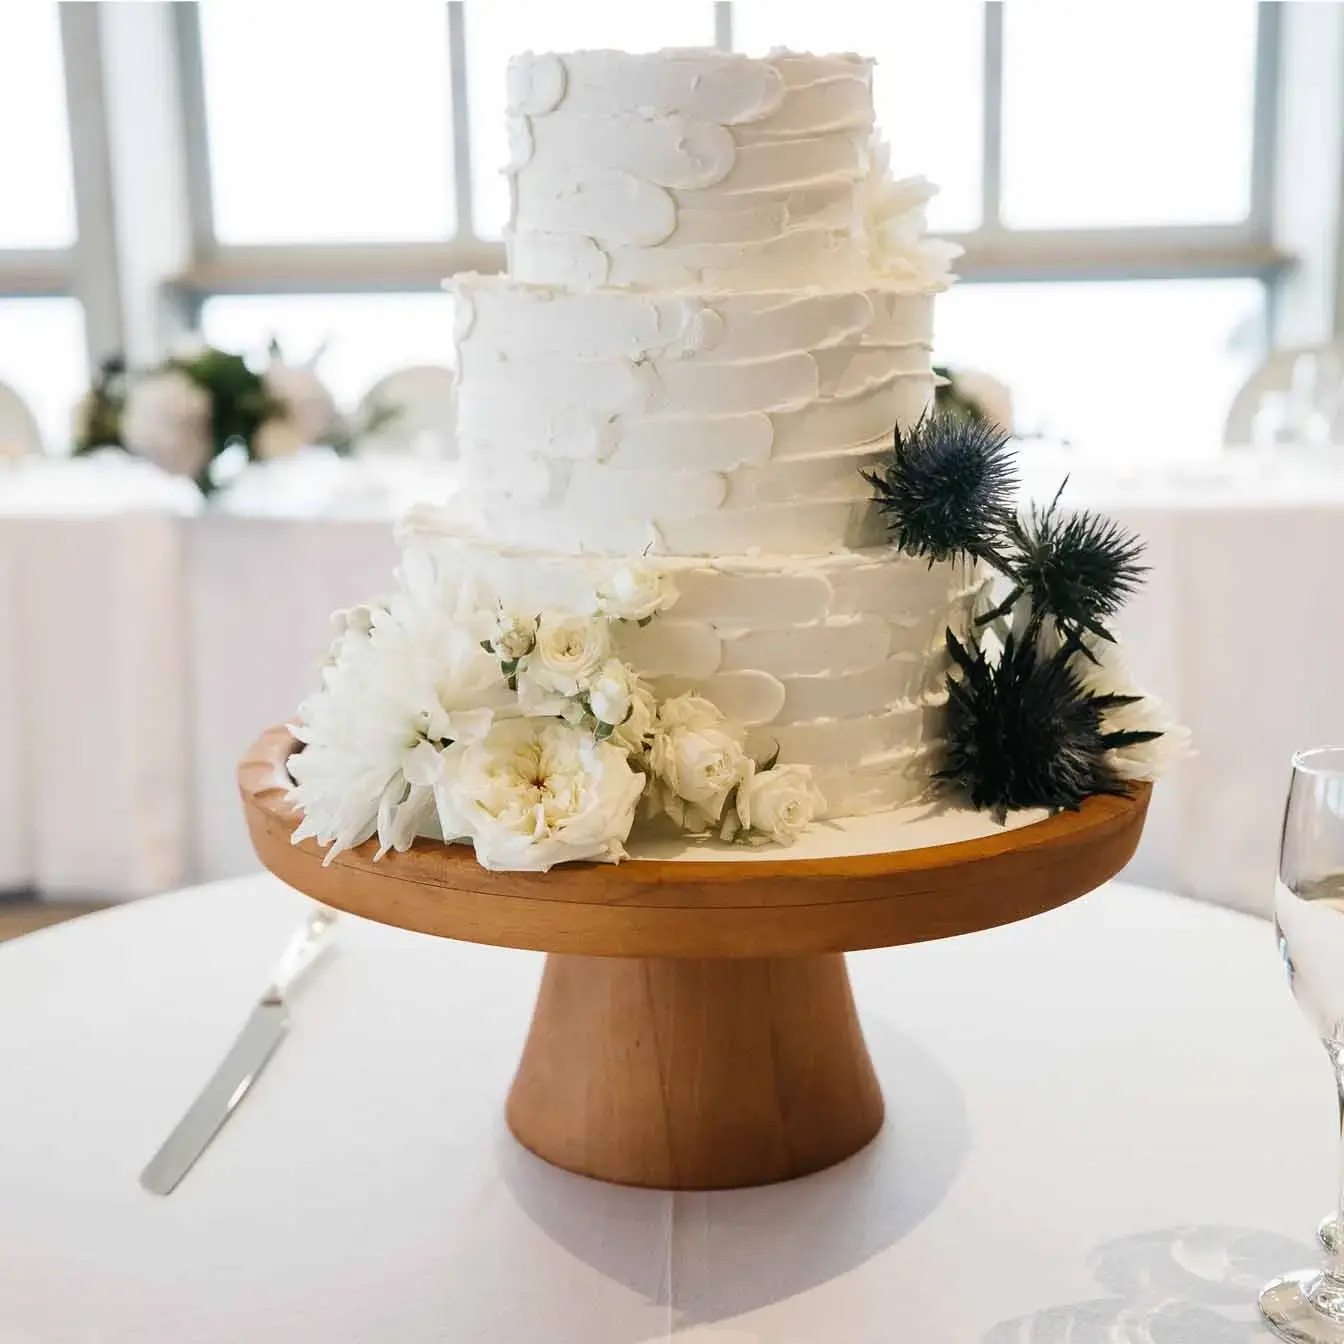 Rustic Coastal Bliss Wedding Cake - A three-tier cake with a rustic palette knife finish and adorned with fresh flowers, a centerpiece that captures the essence of coastal romance